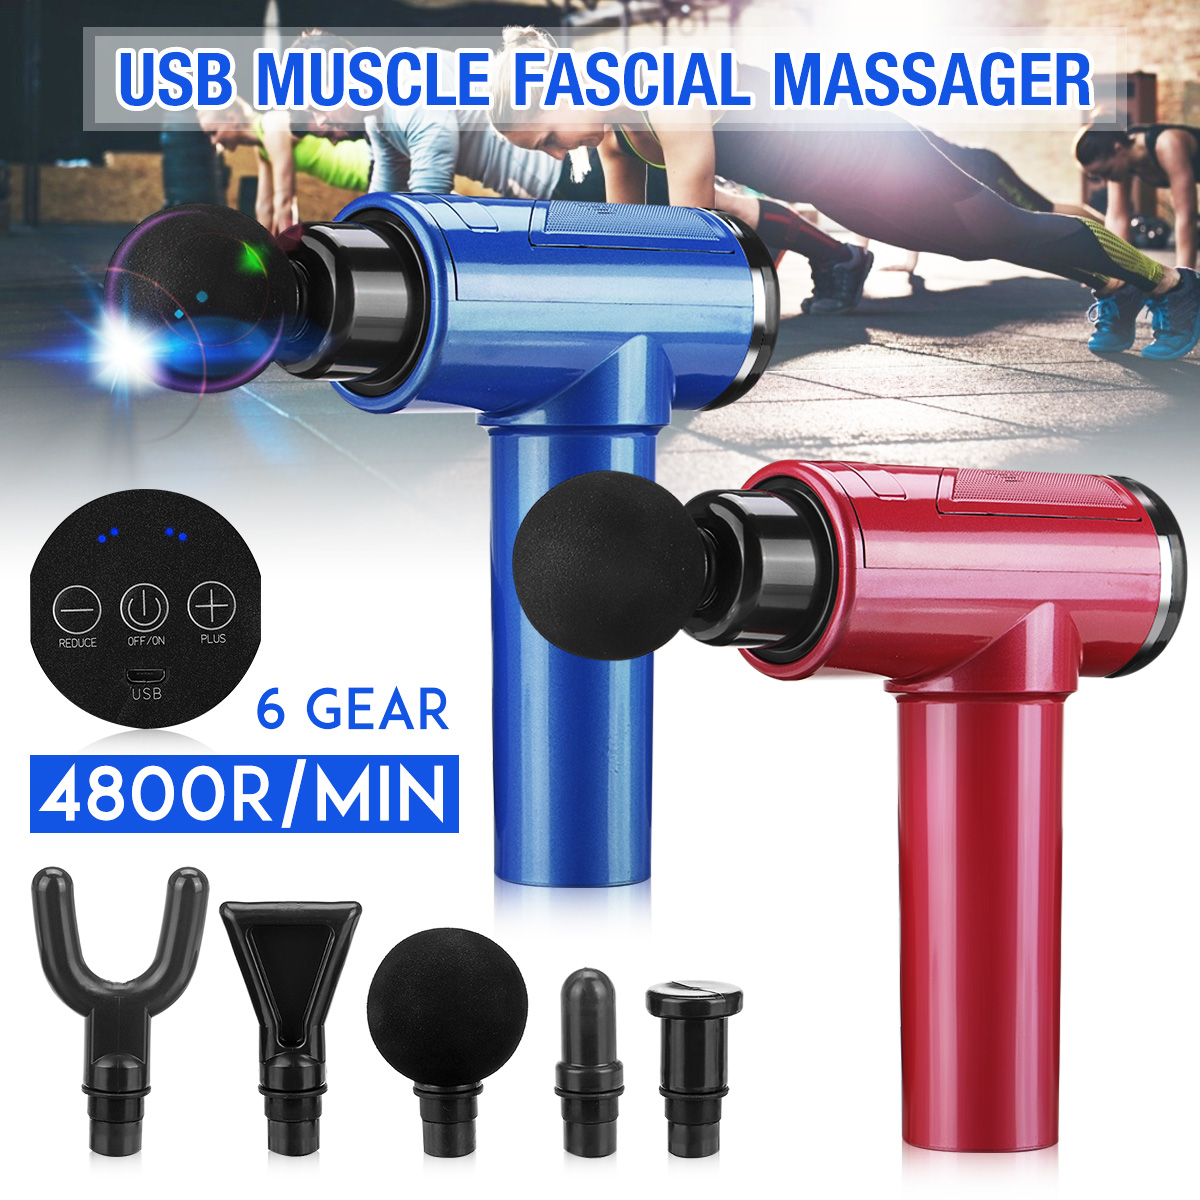 3600-4800rmin-6-Speed-Muscle-Relief-Massage-Therapy-USB-Vibration-Deep-Tissue-Electric-Percussion-Ma-1715805-2